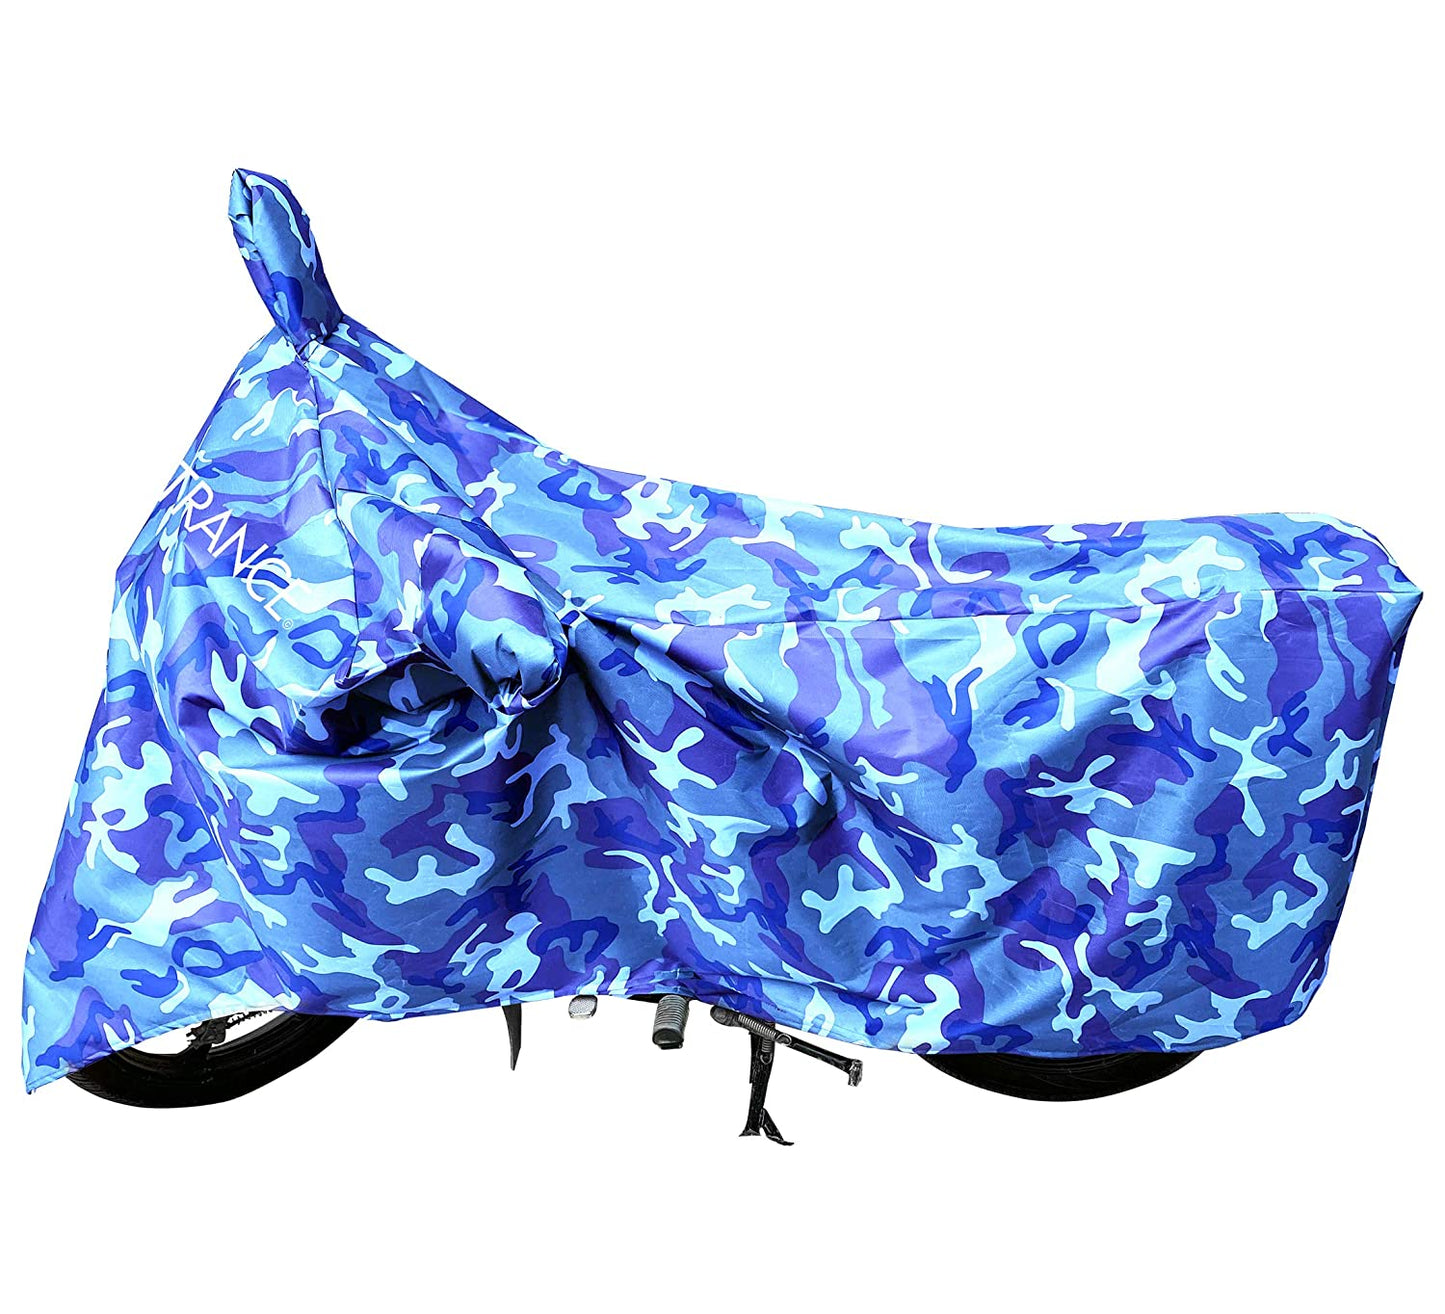 MotoTrance Jungle Bike Body Covers For BajajÂ  Platina 110 2018 - Interlock-Stitched Waterproof and Heat Resistant with Mirror Pockets